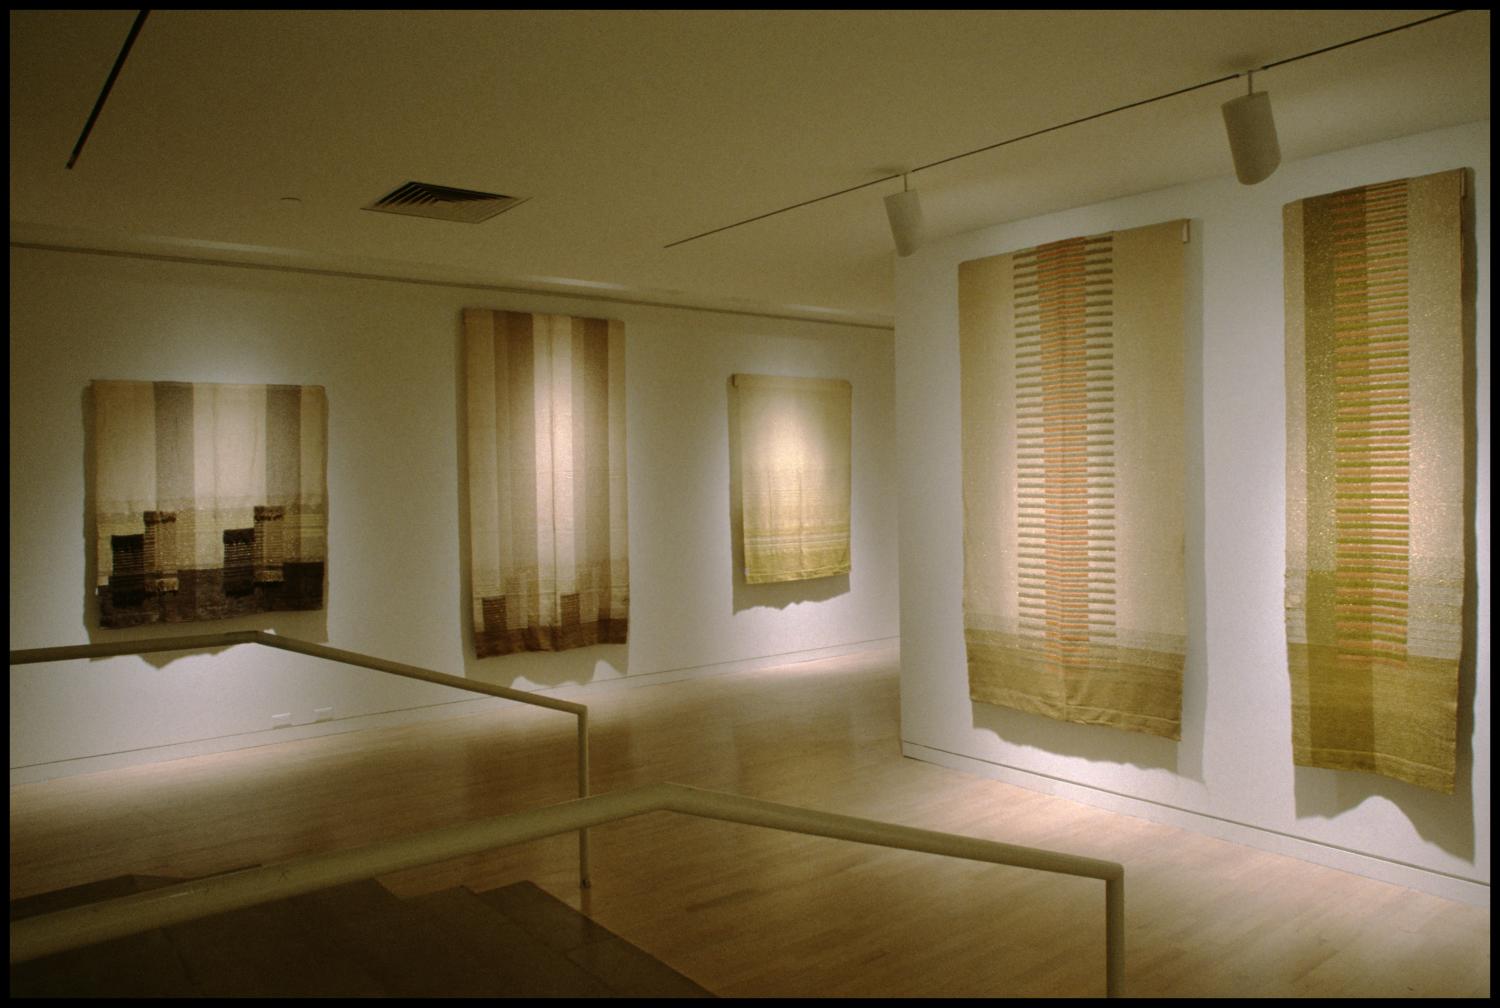 Dallas Museum of Art Installation: American Art and American Decorative Arts, 1998 [Photograph DMA_90011-08]
                                                
                                                    [Sequence #]: 1 of 1
                                                